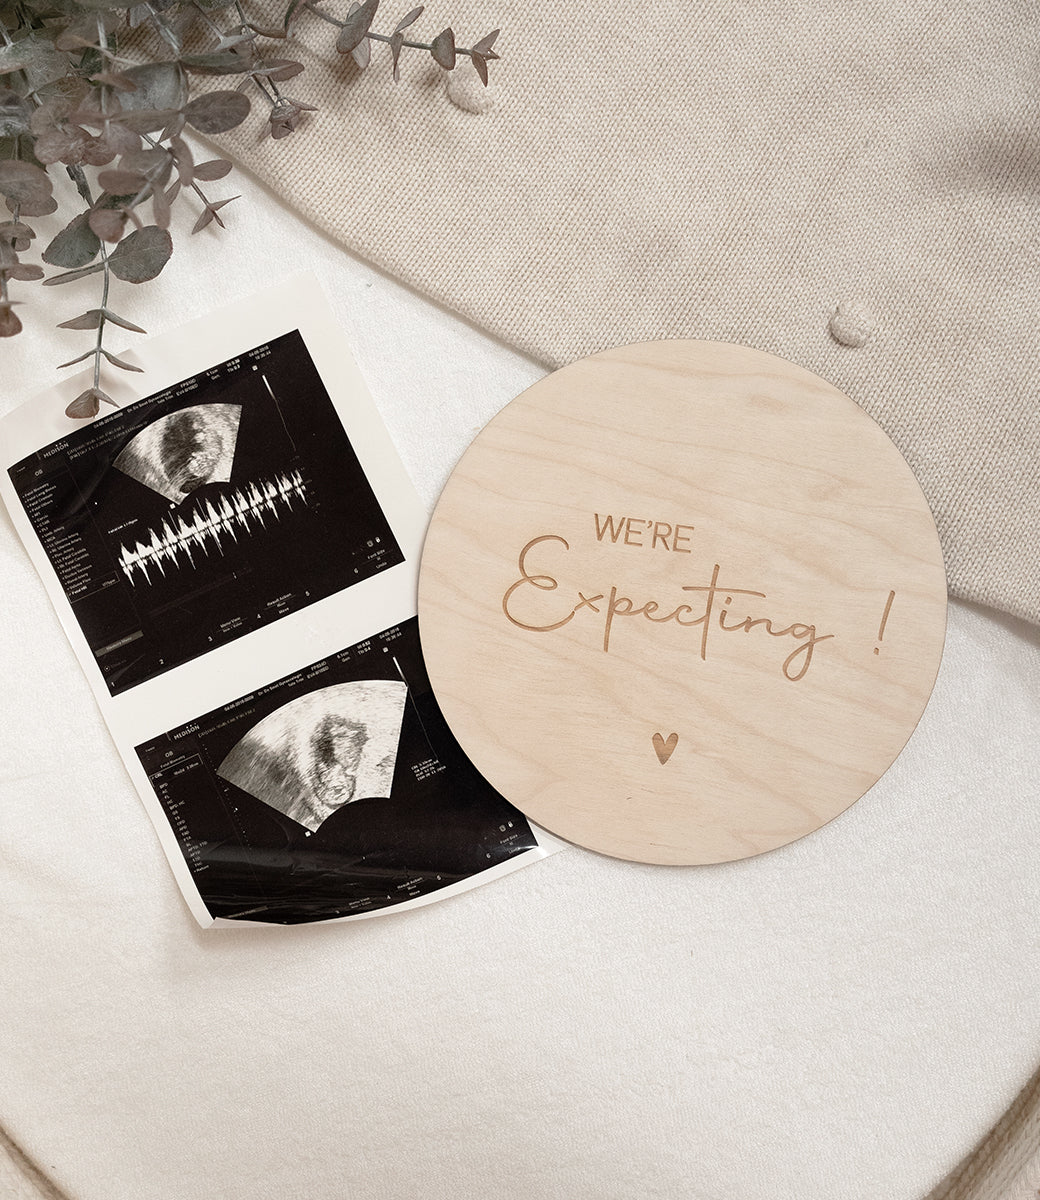 Announcement // We're expecting!